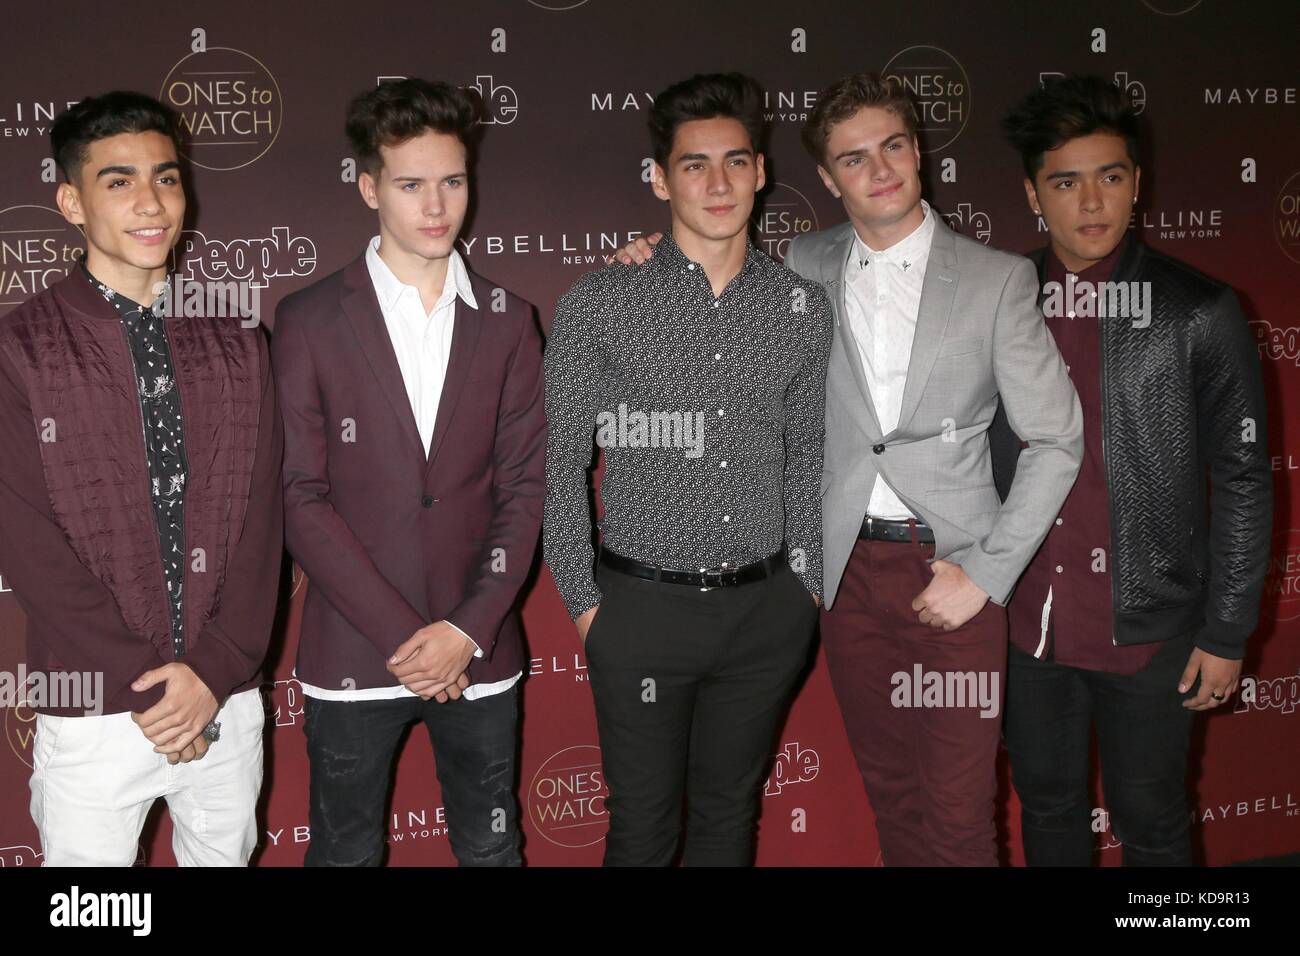 Los Angeles, CA, USA. 4th Oct, 2017. Drew Ramos, Michael Conor, Chance Perez, Brady Tutton, Sergio Calderon, In Real Life  at arrivals for 2017 People's Ones To Watch Event - Part 2, Neuehouse Hollywood, Los Angeles, CA October 4, 2017. Credit: Priscilla Grant/Everett Collection/Alamy Live News Stock Photo